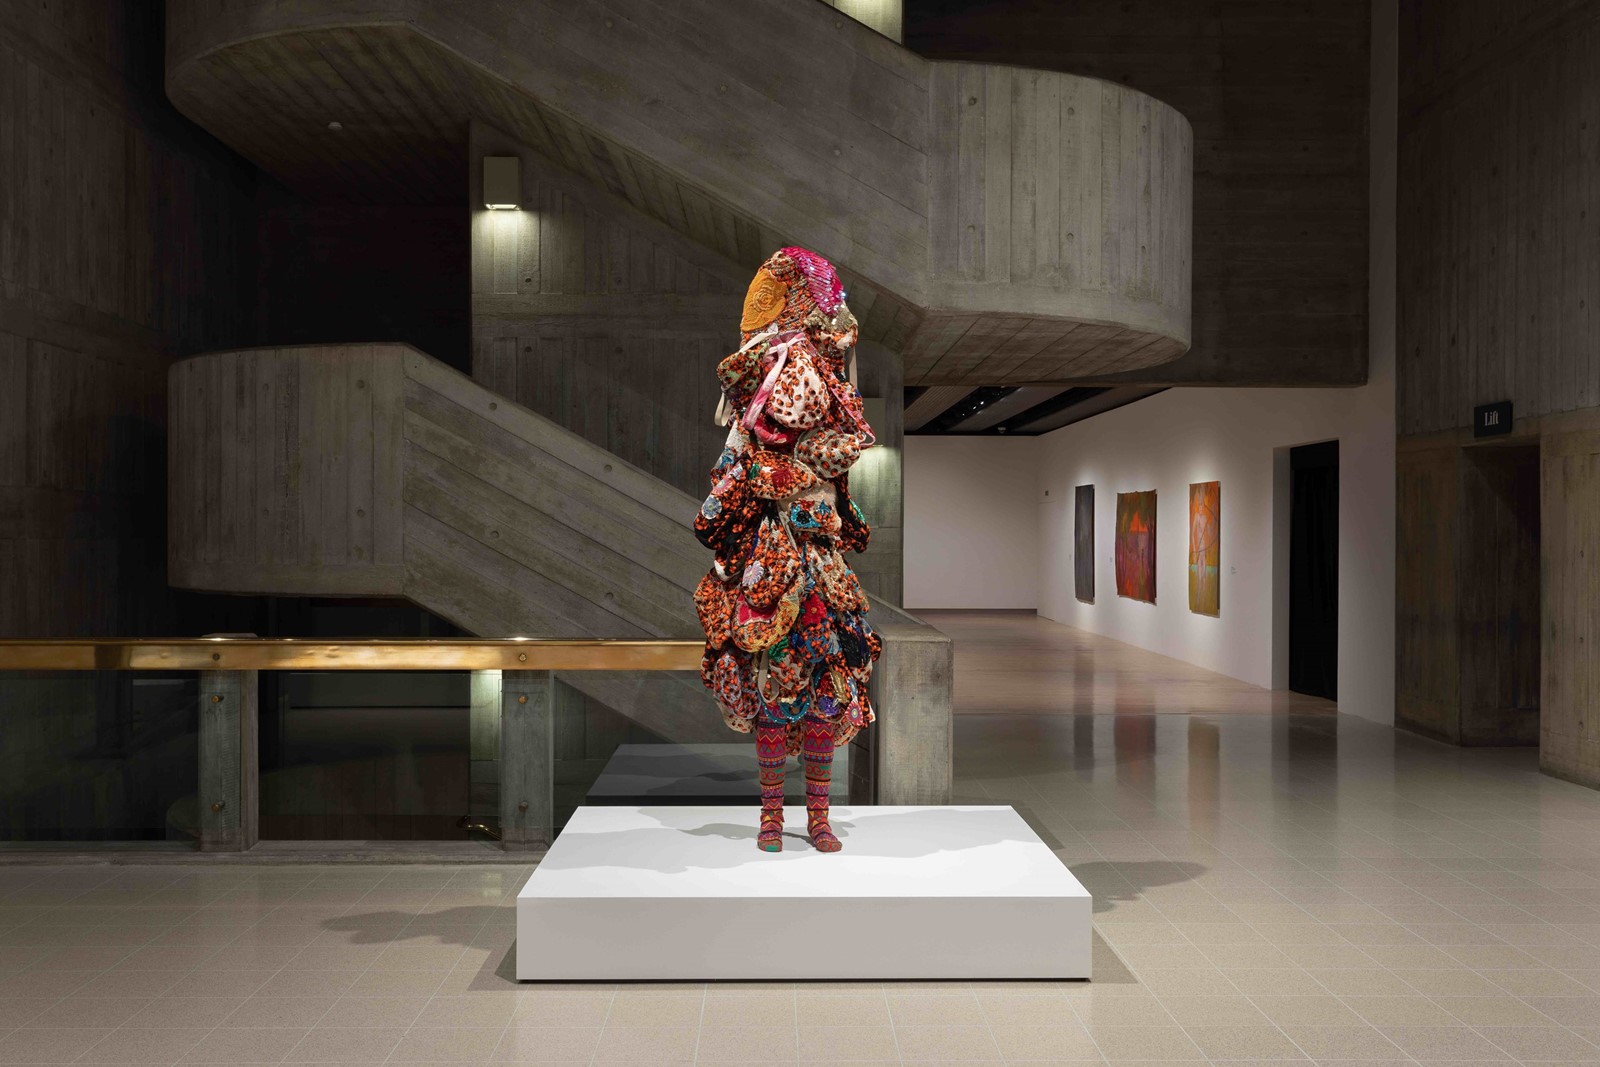 Installation View of Nick Cave, Soundsuit 2010 at 